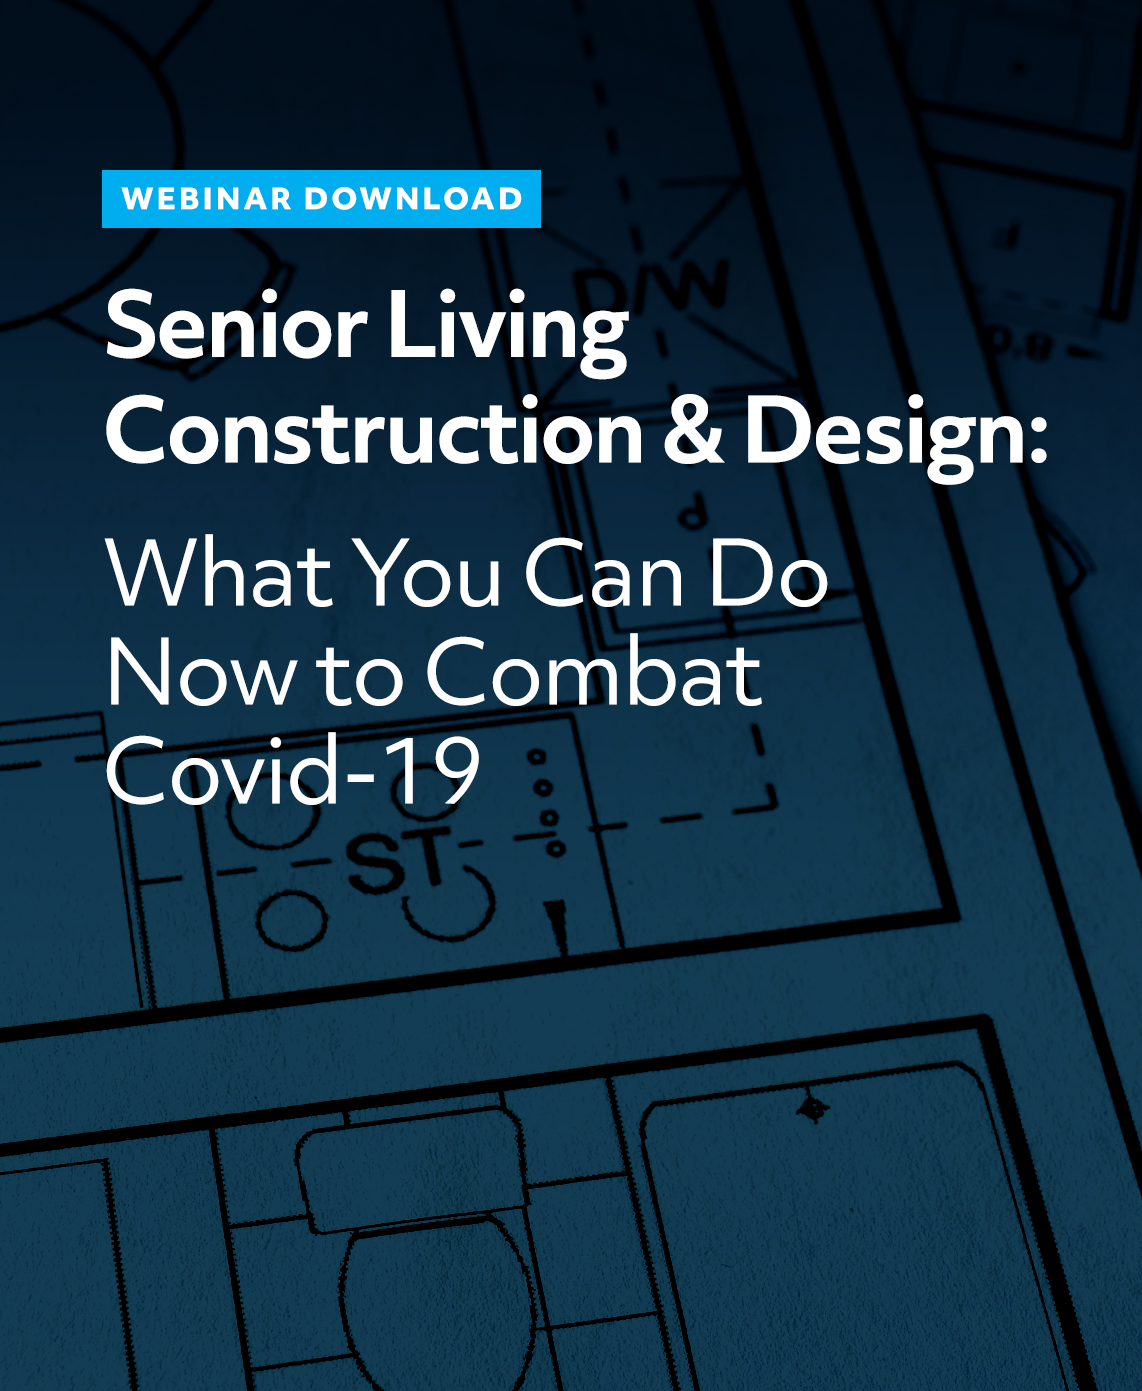 [Webinar] Senior Living Construction and Design: What You Can Do Now to Combat Covid-19